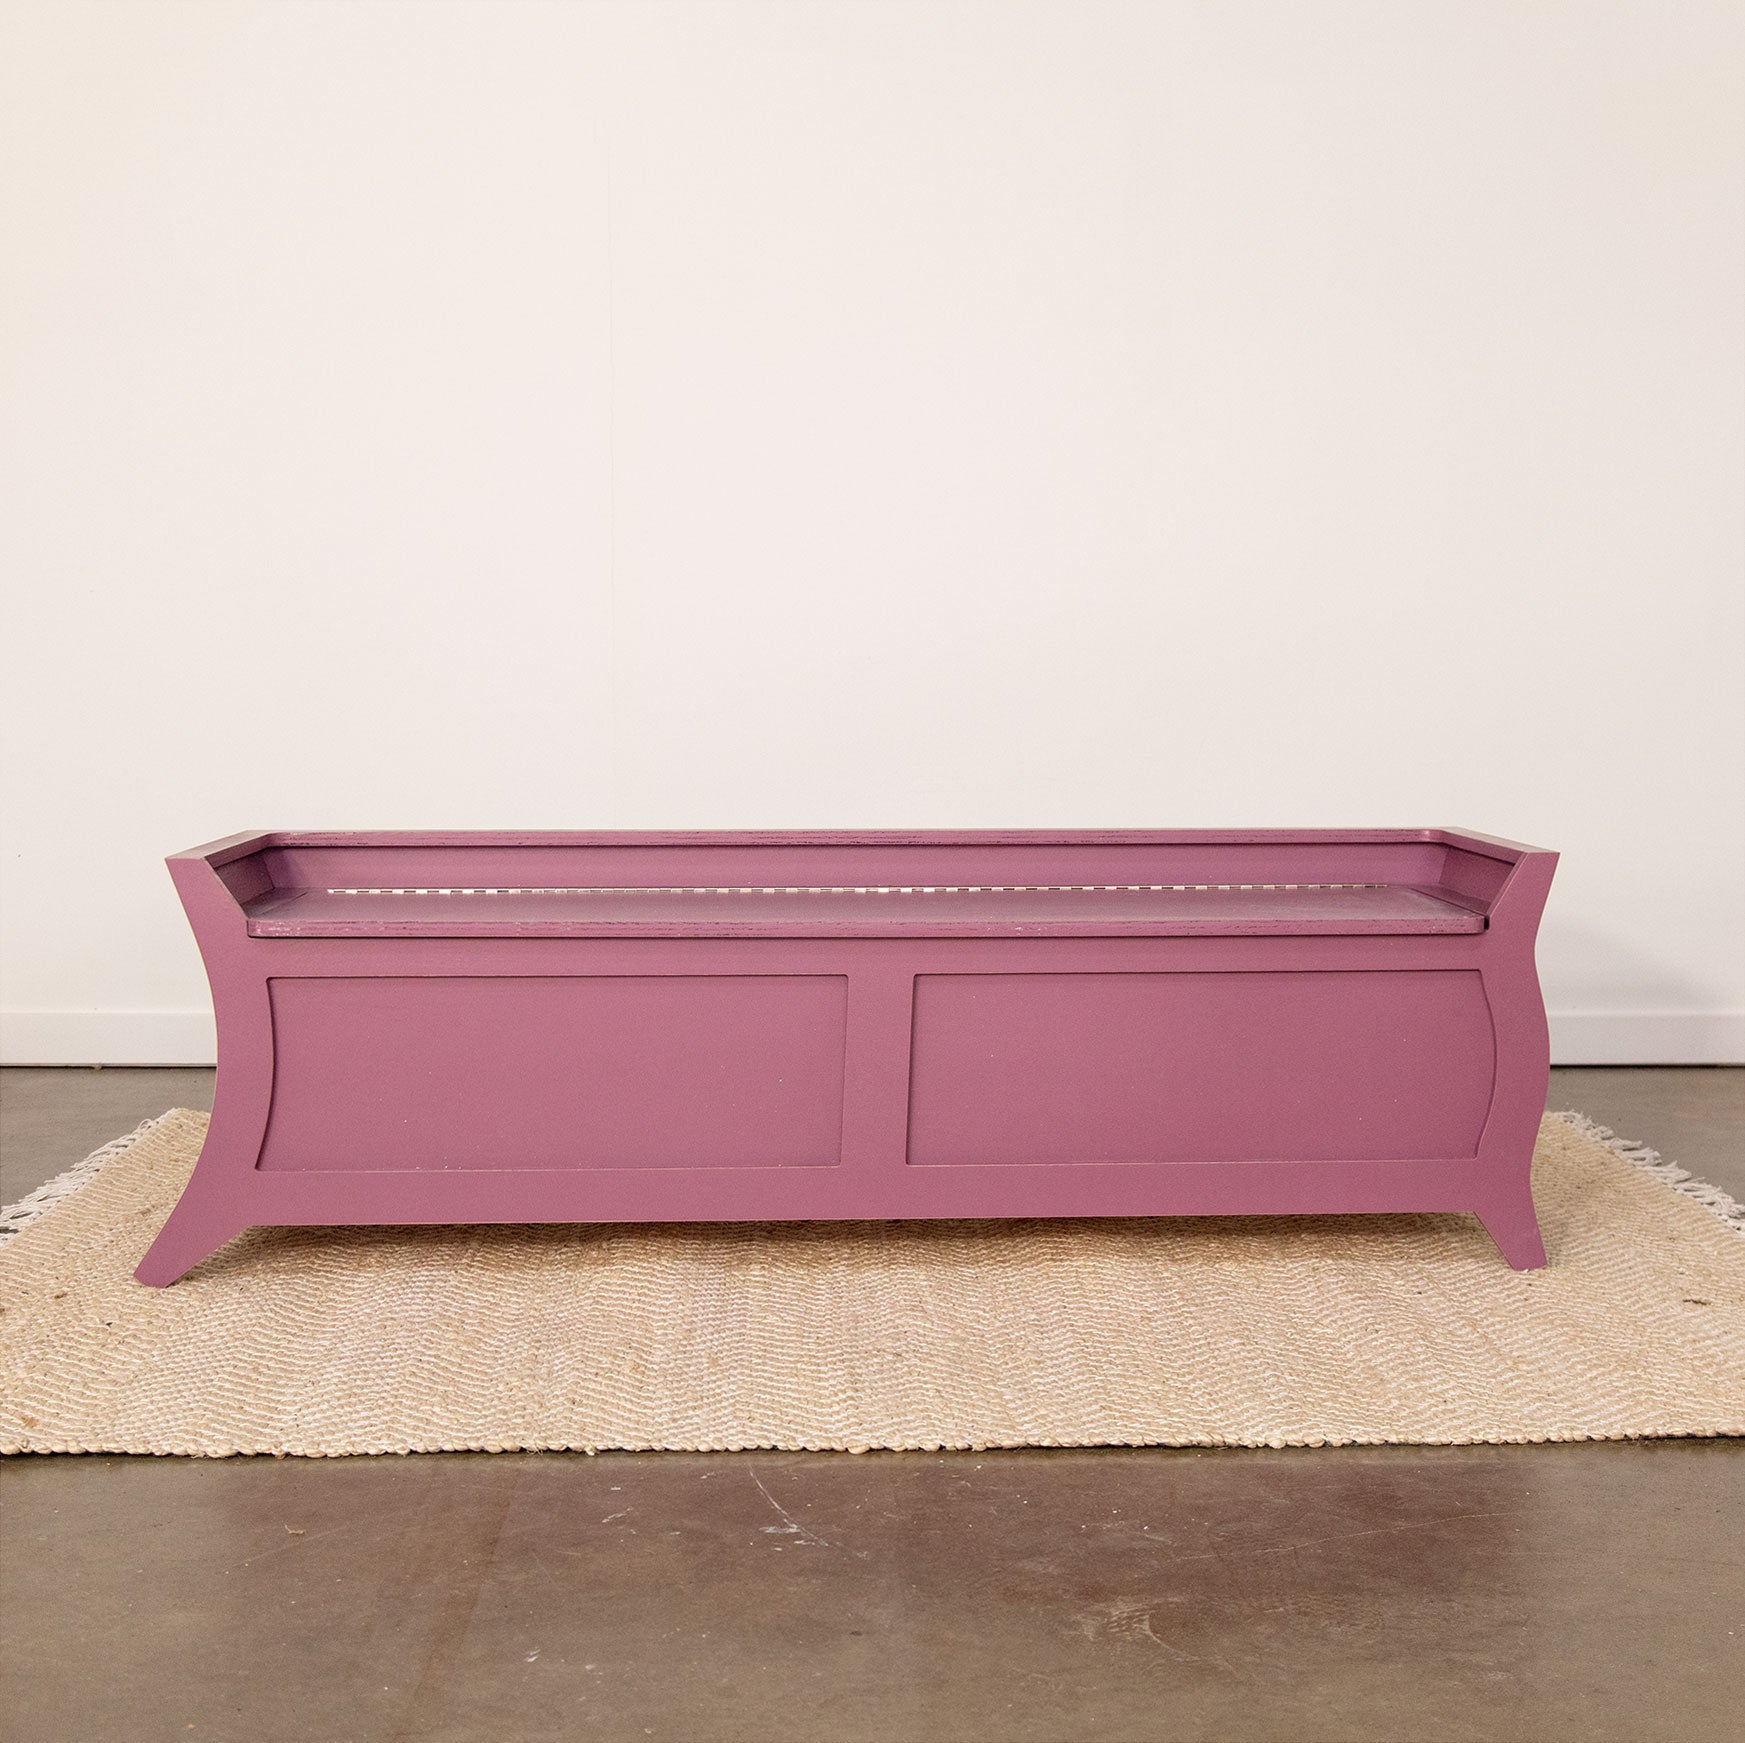 Entry Bench // Curved Chest - Bench with Shoe Storage